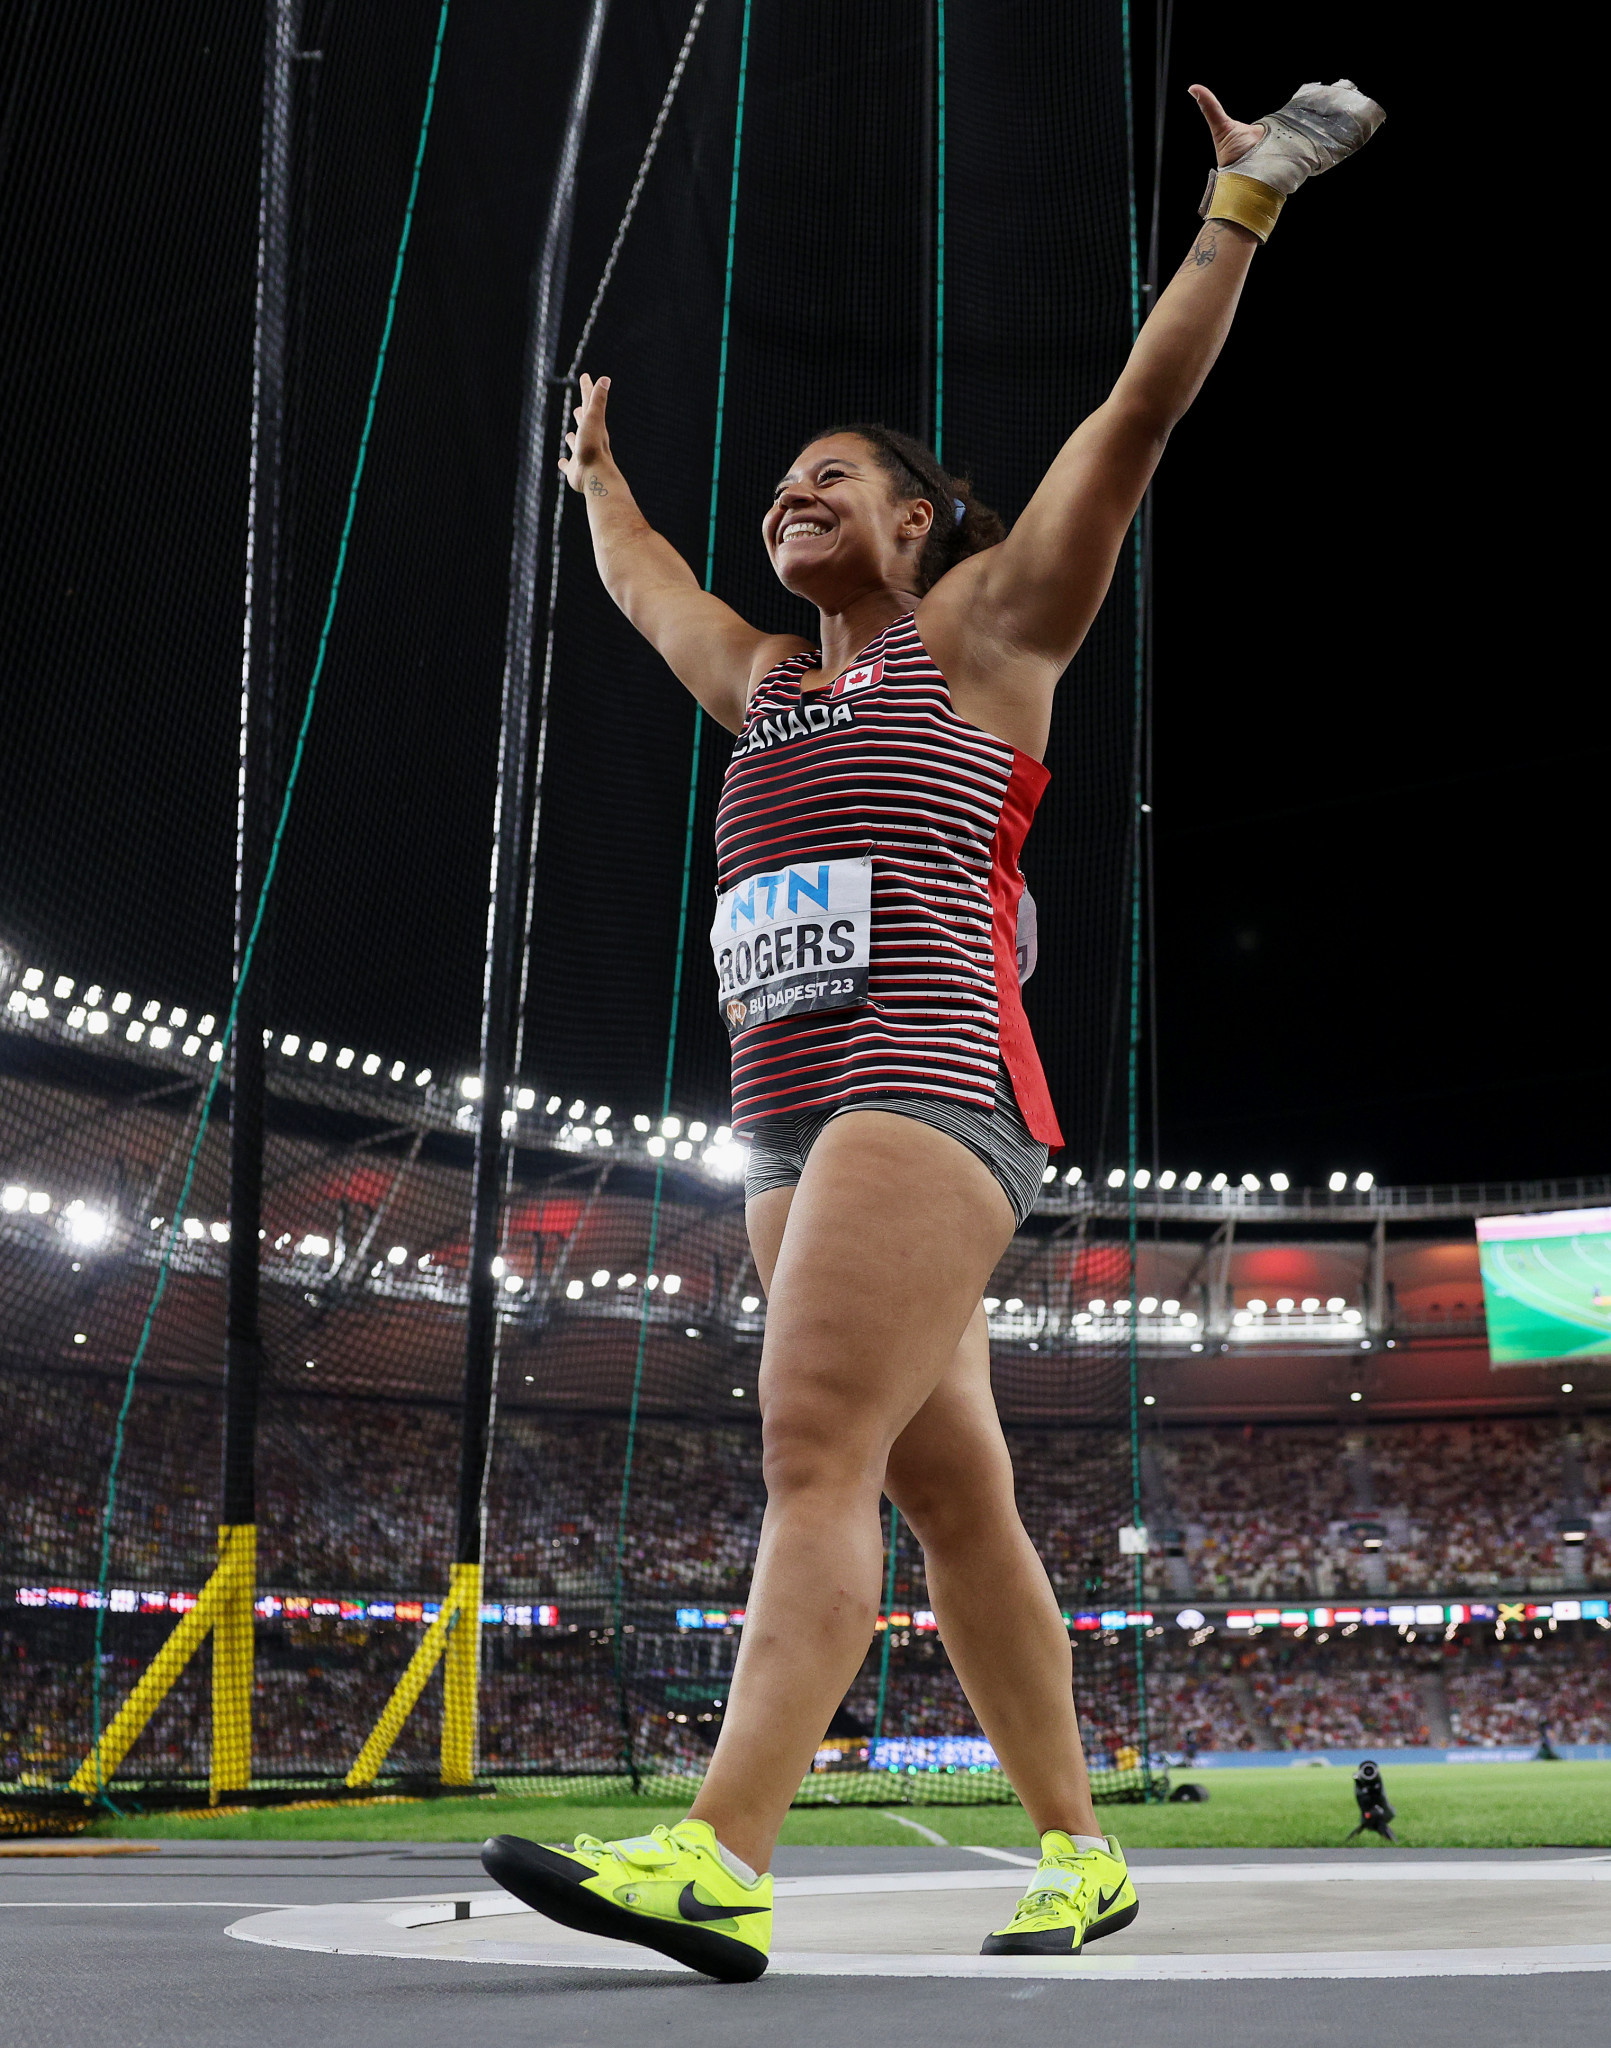 Canada's Camryn Rogers upgraded women's hammer throw silver at last year's World Athletics Championships in Eugene to gold in Budapest ©Getty Images